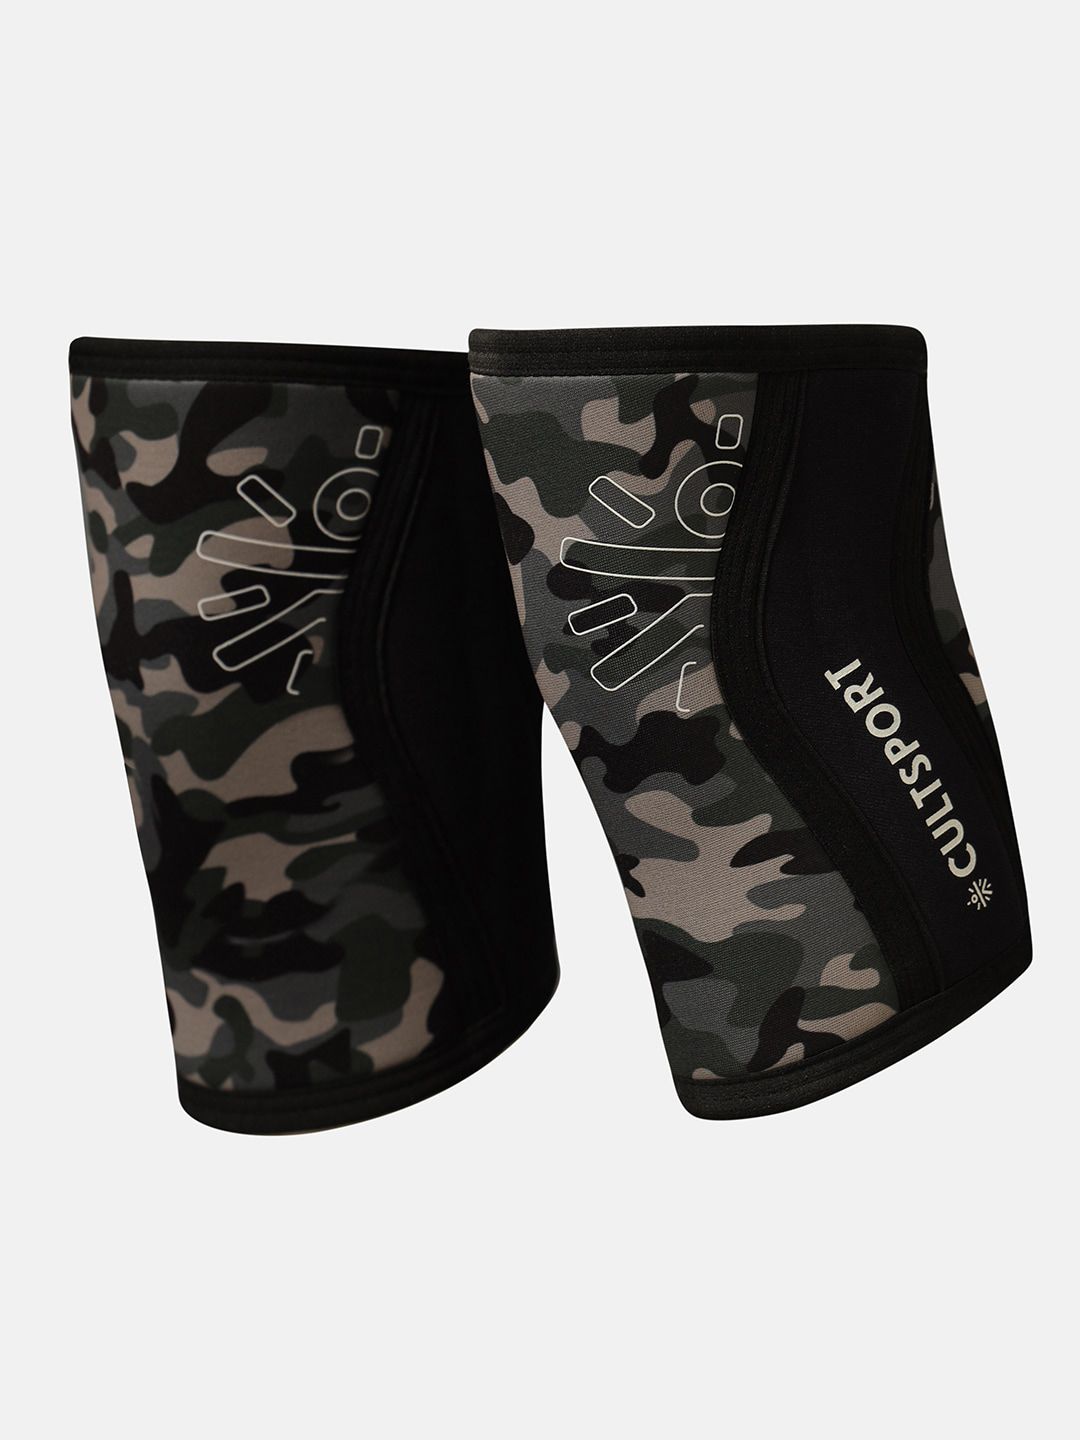 Cultsport Unisex Green Camo Print Knee Protector Sleeves Price in India